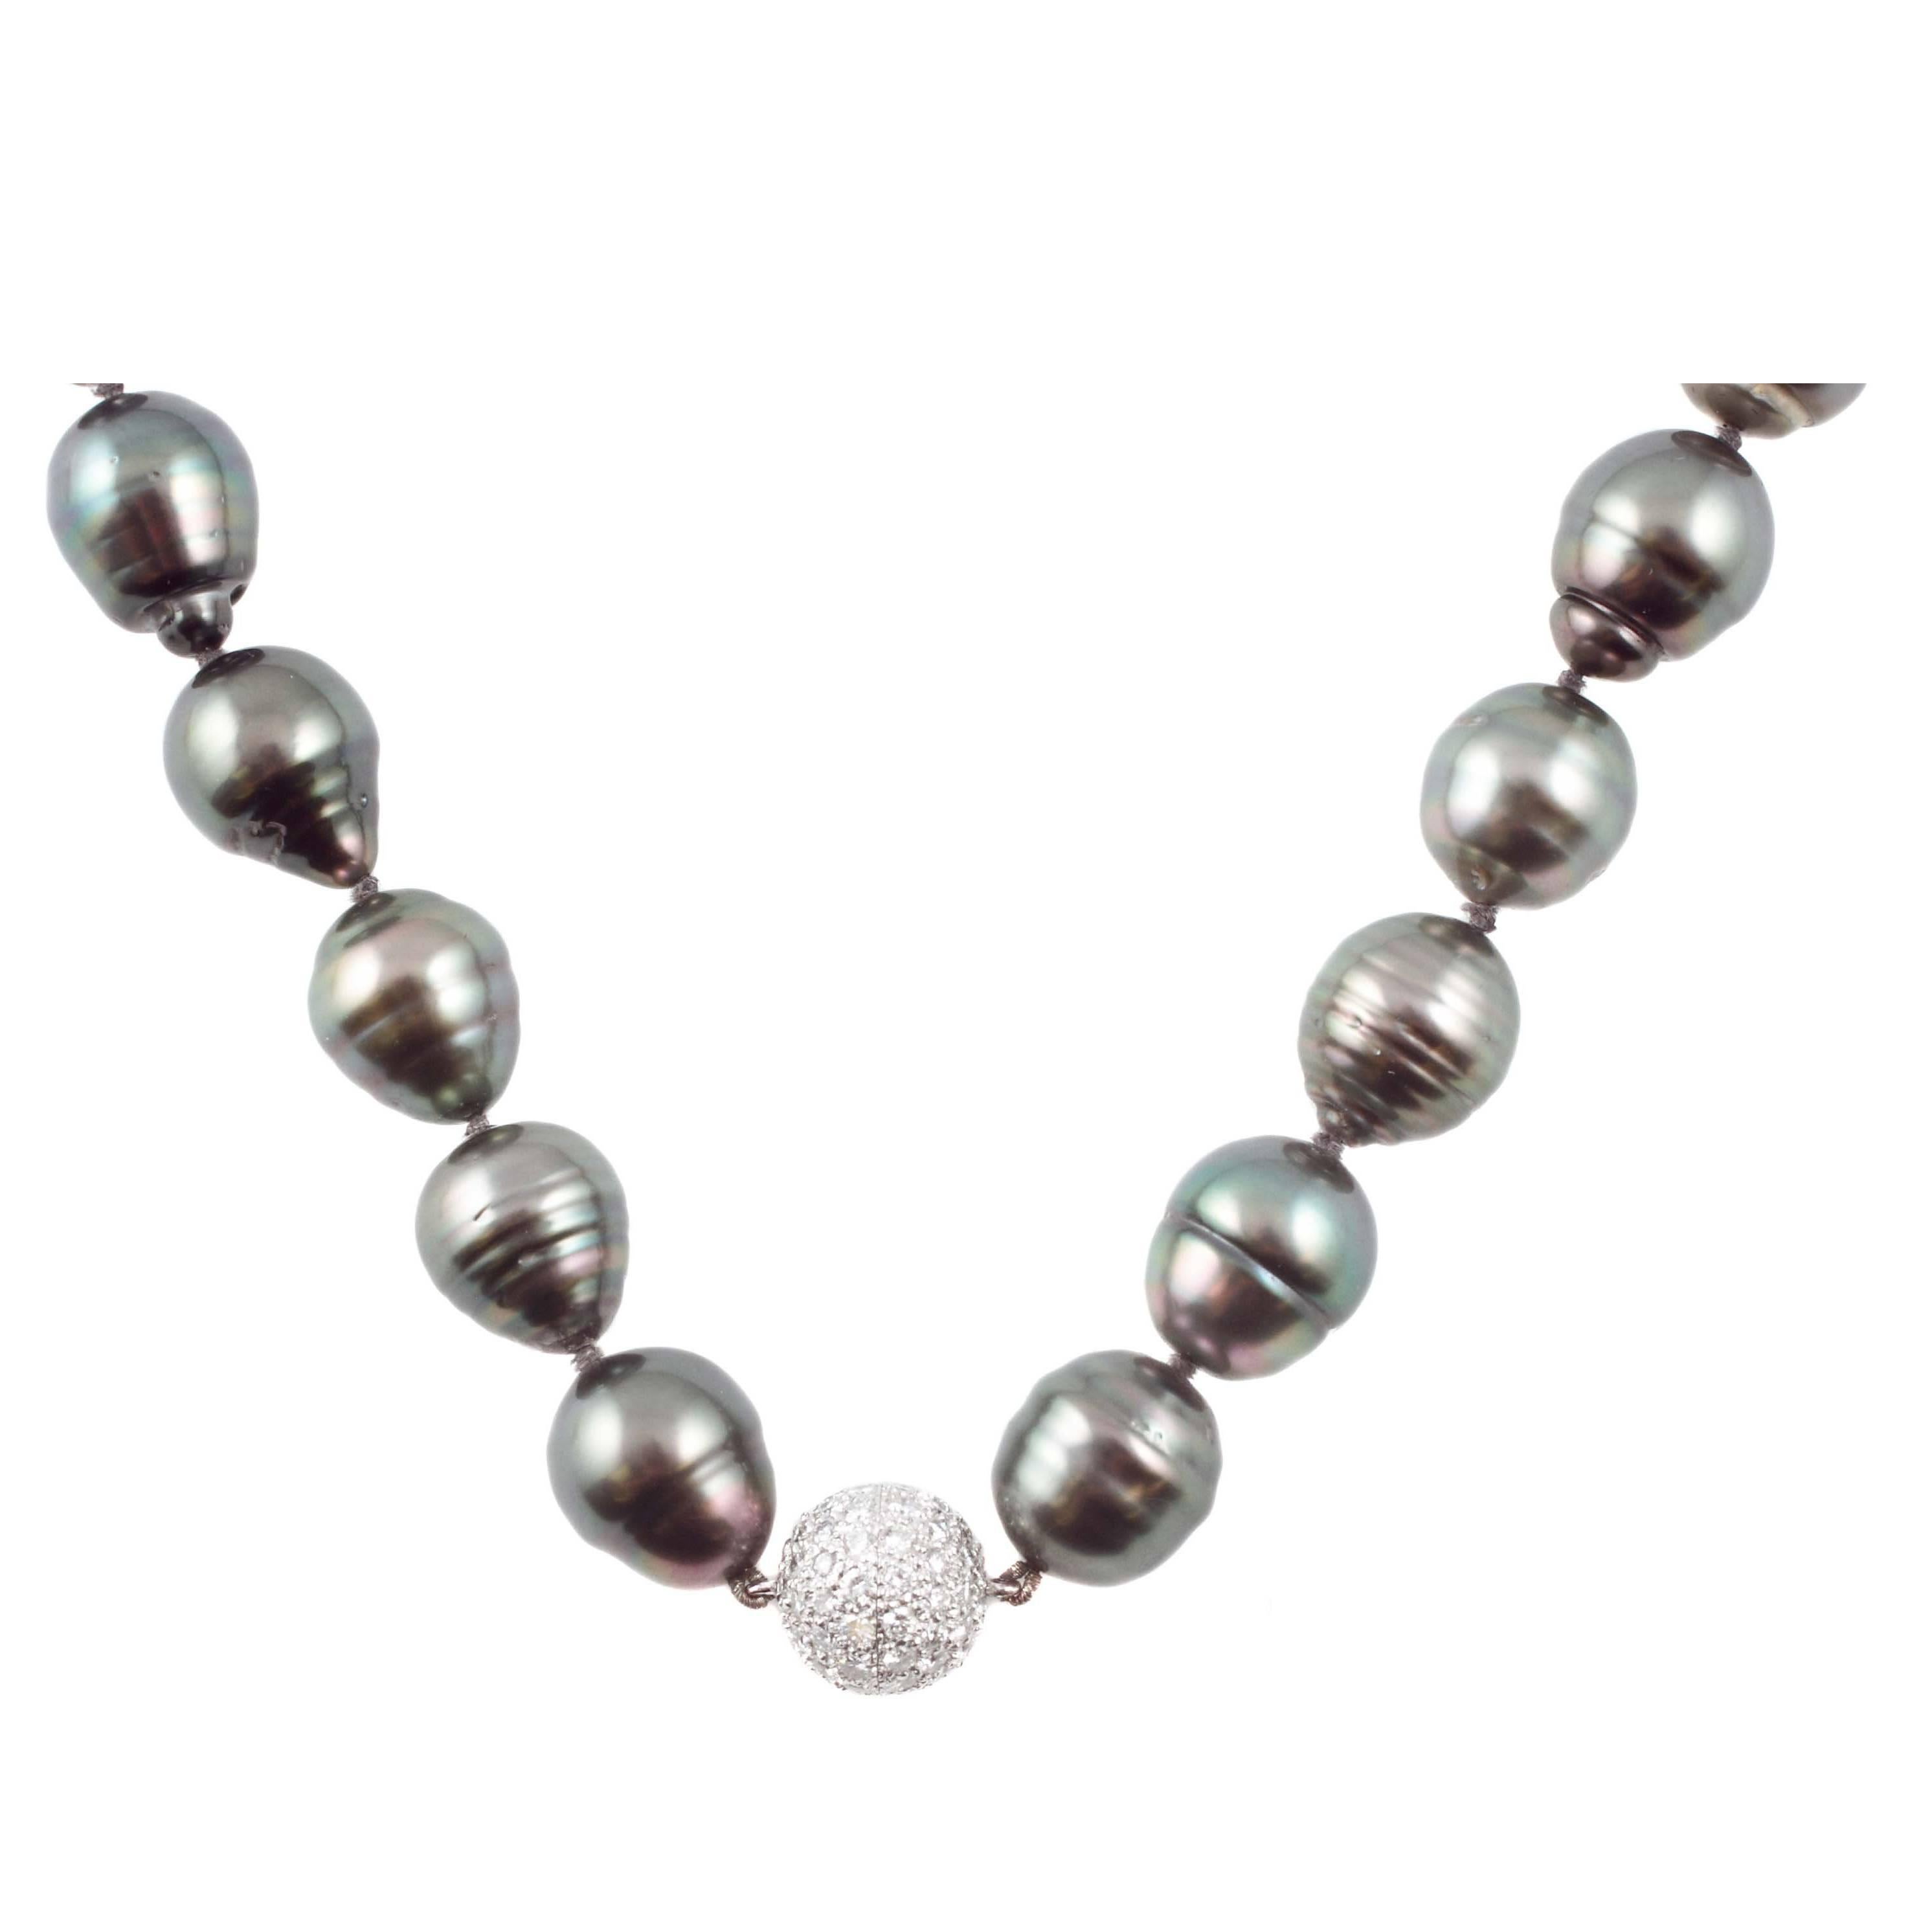 Stunning Strand Natural Color Tahitian Cultured Pearls Diamond Clasp